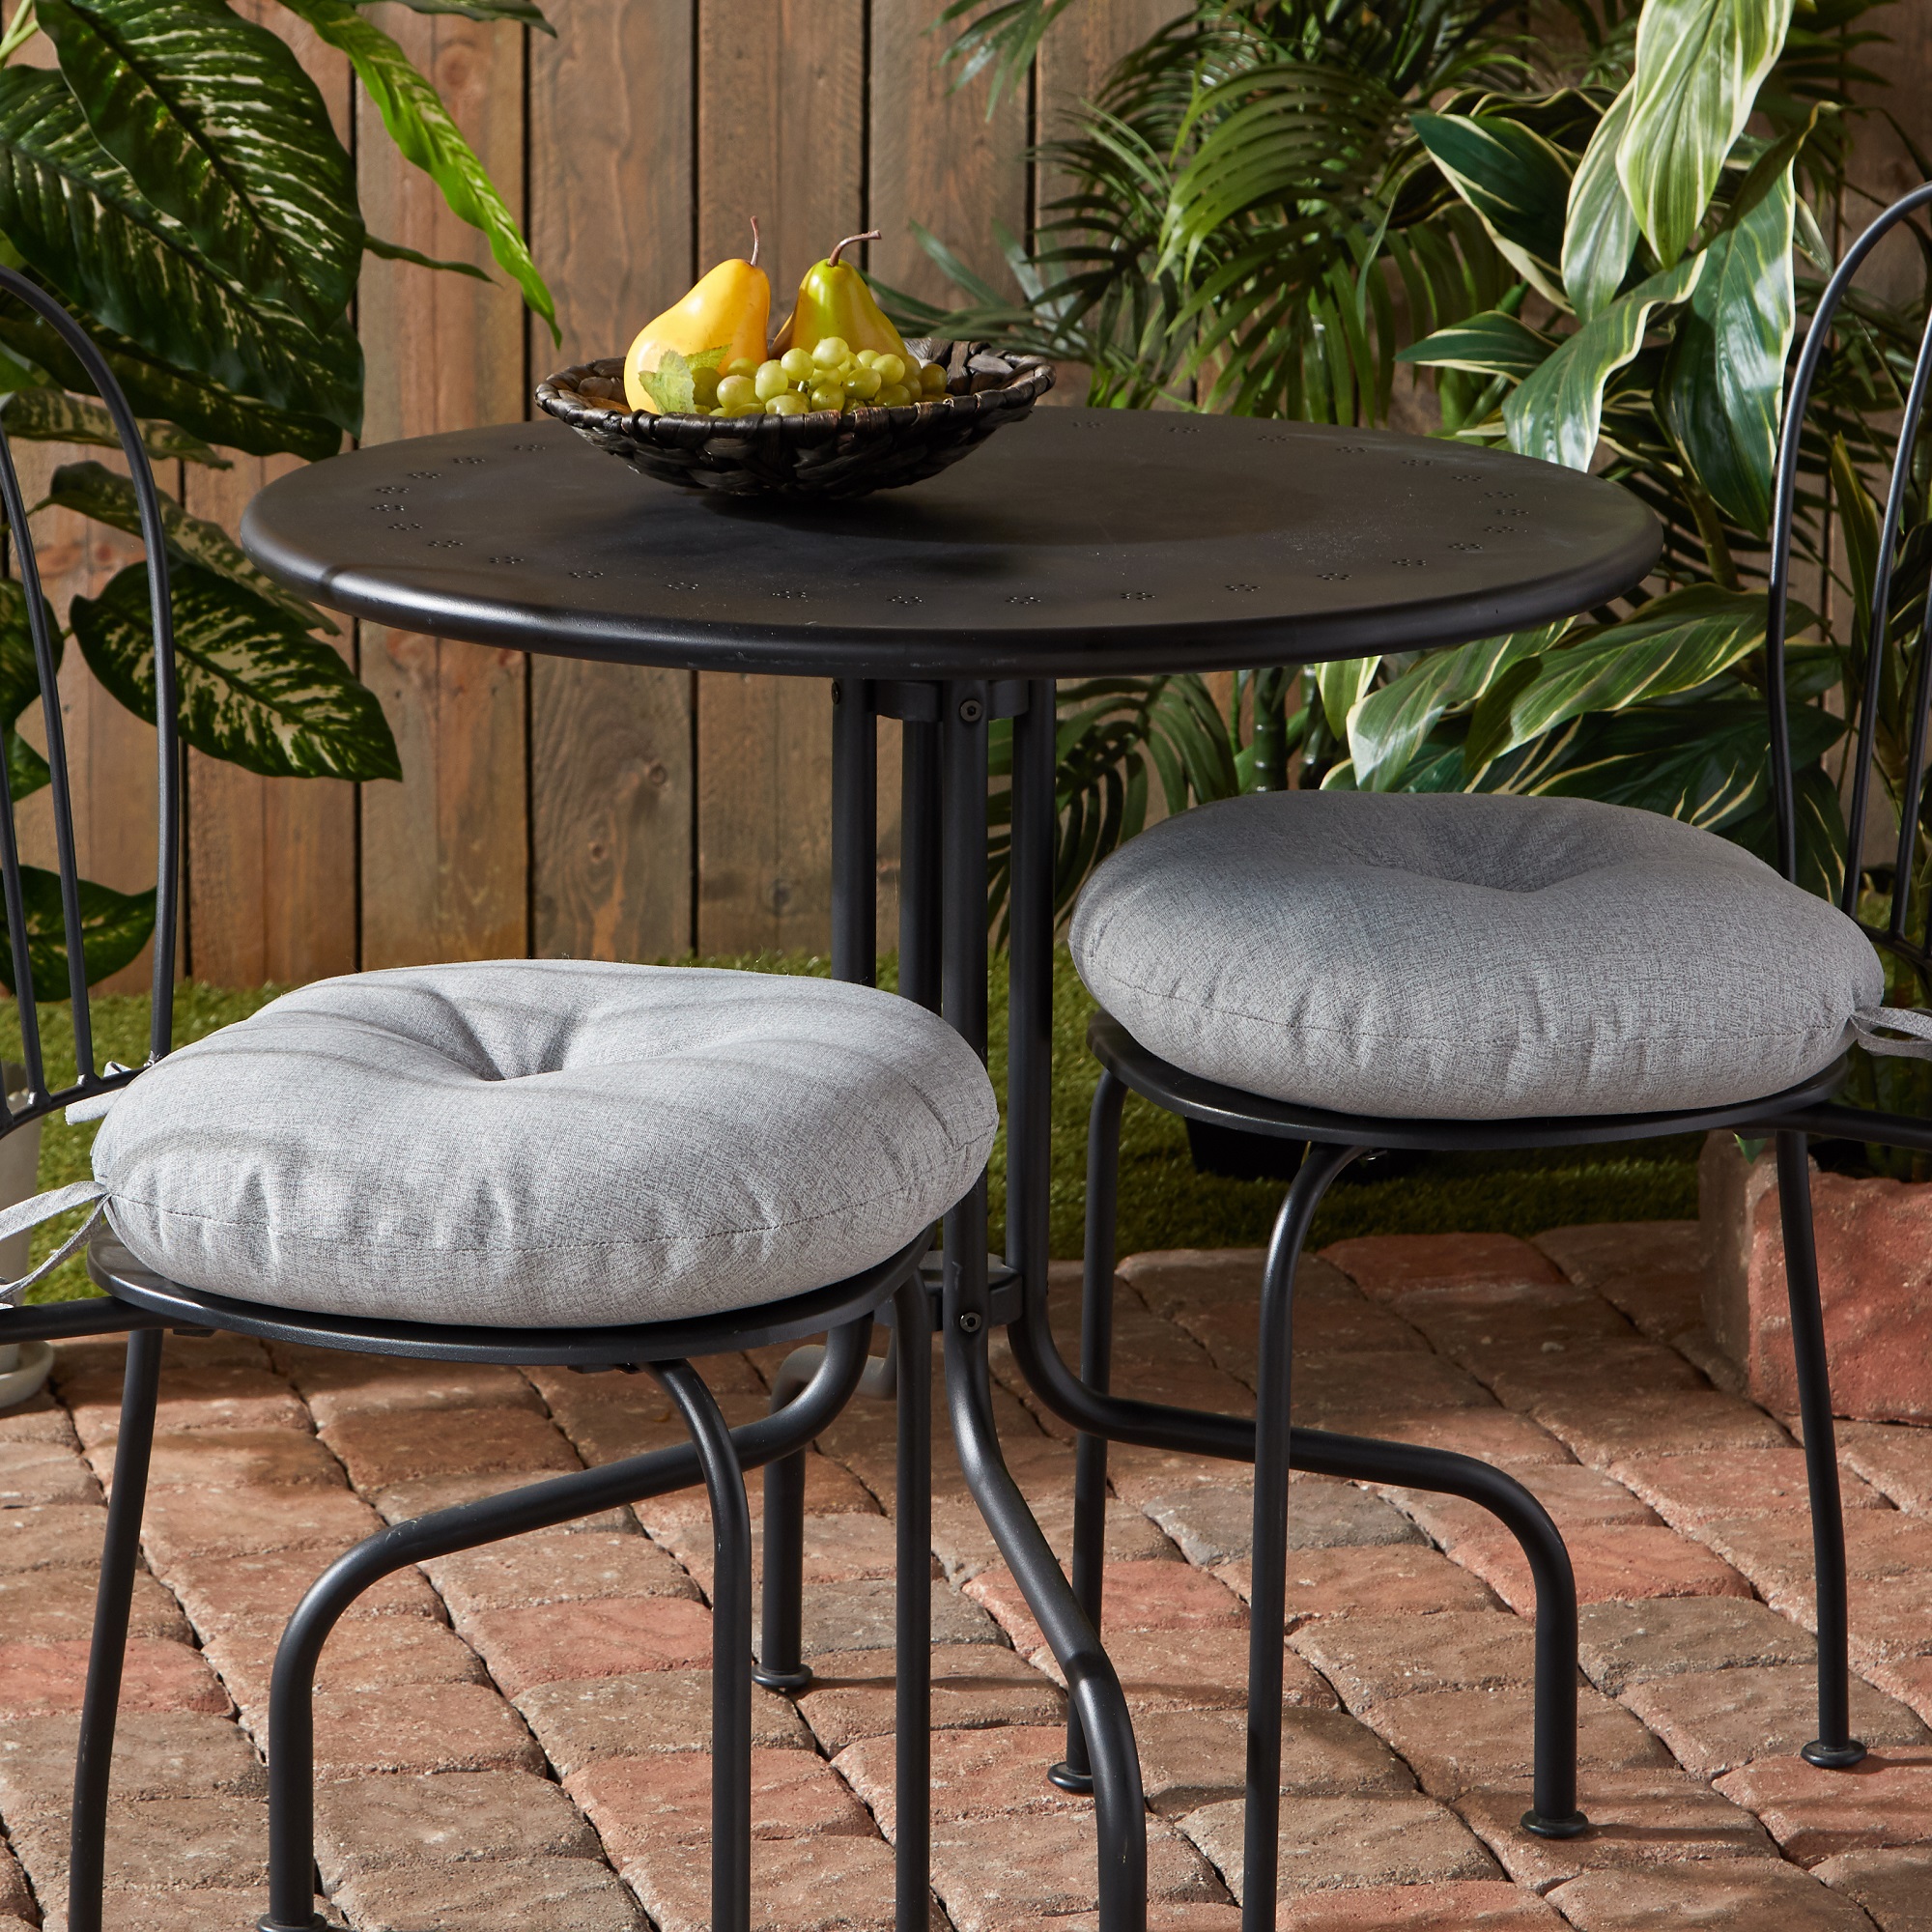 Greendale Home Fashions Heather Gray 15 in. Round Outdoor Reversible Bistro Seat Cushion (Set of 2) - image 3 of 7